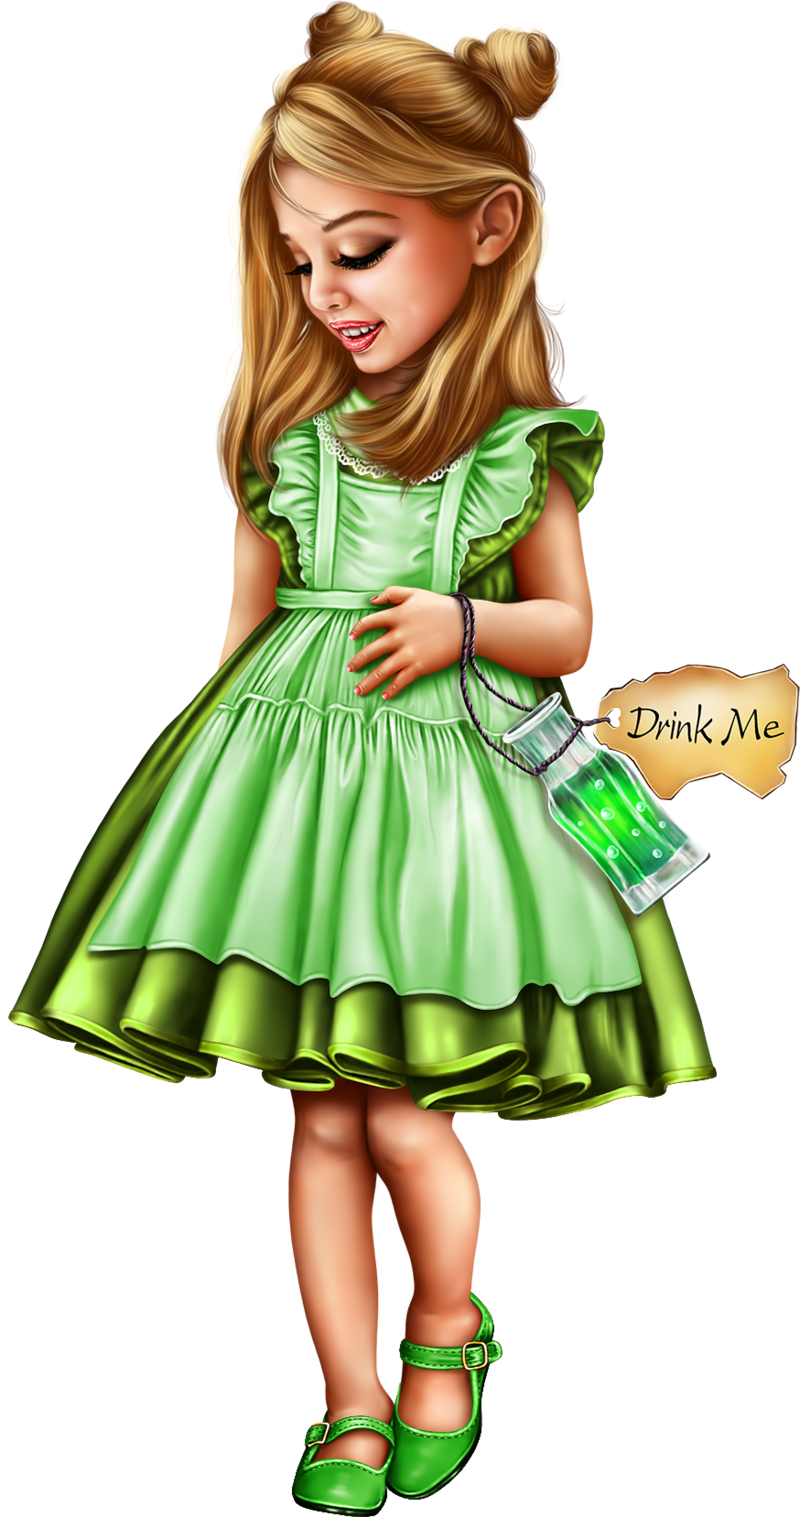 alice-dancing-with-rabbit-png28.png